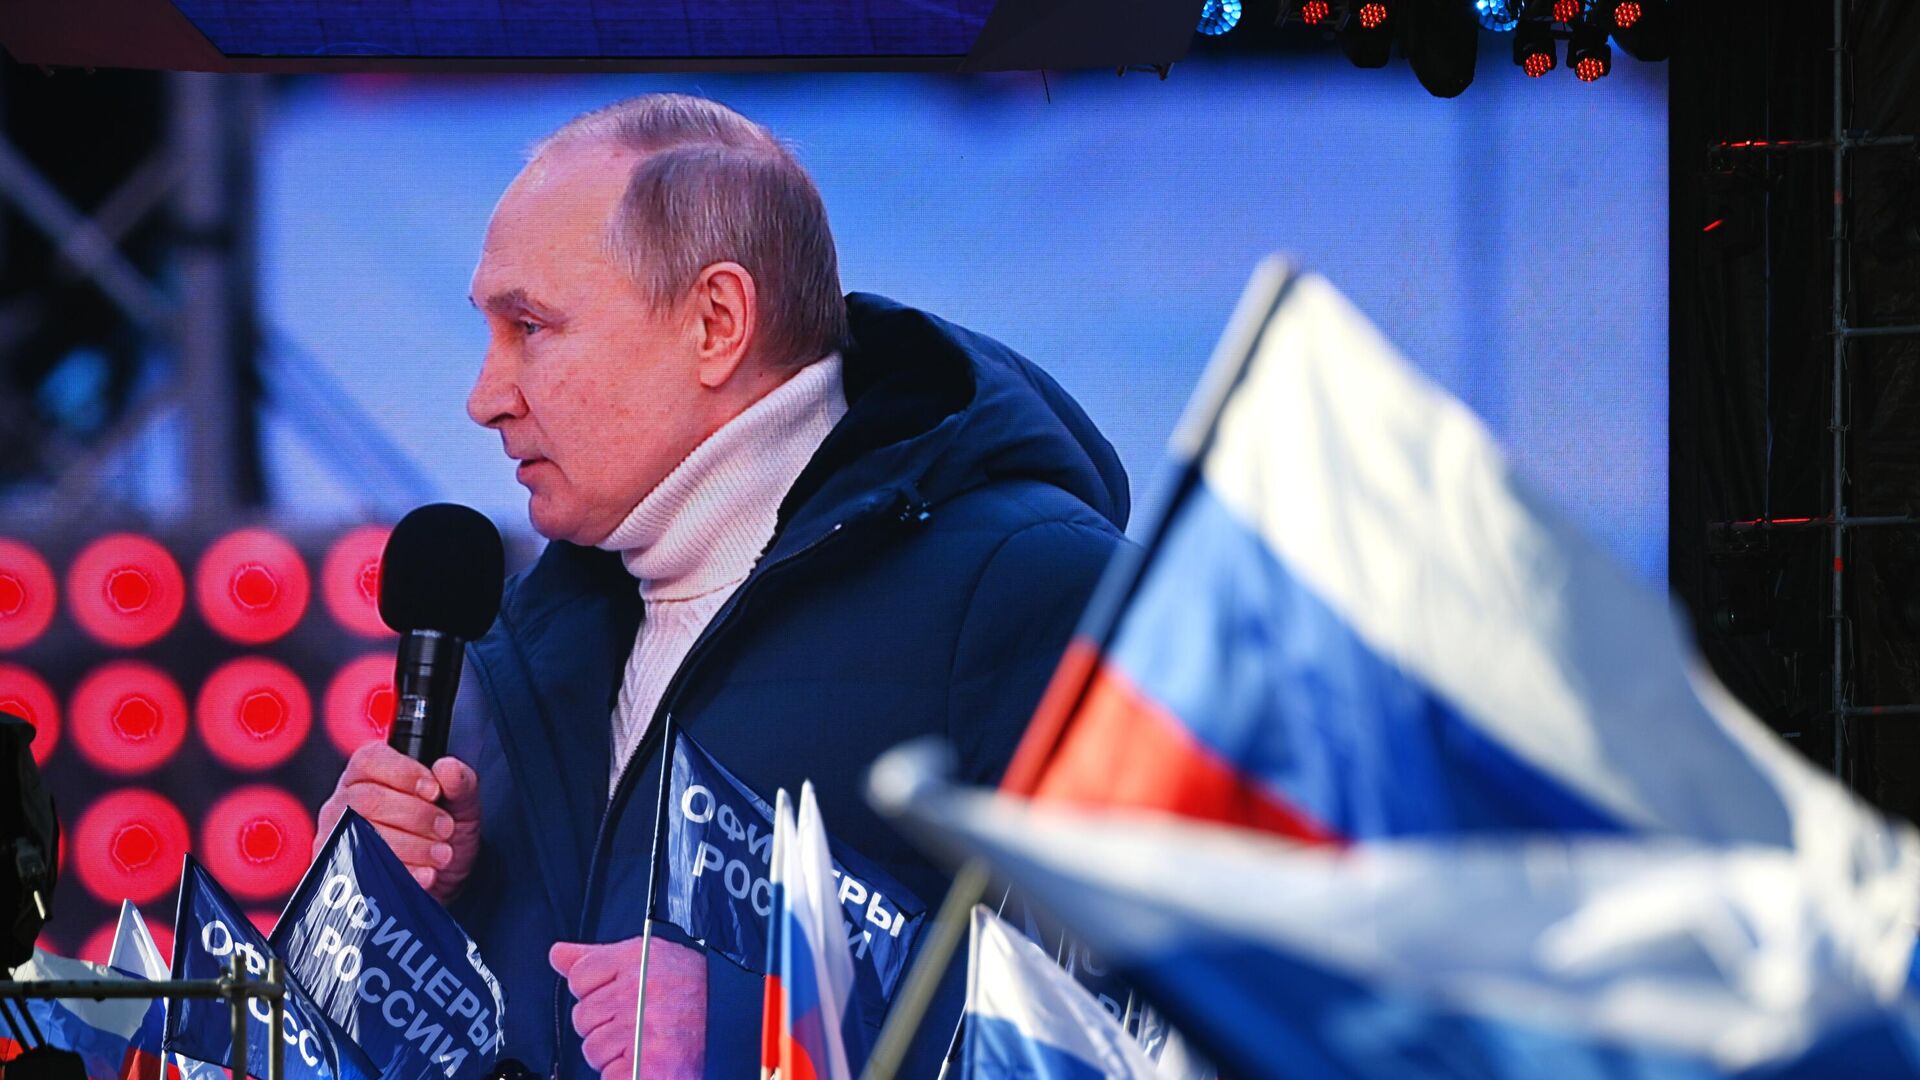 Russian President Vladimir Putin at the concert dedicated to the celebration of the unification of Crimea with Russia in 2014 - Sputnik International, 1920, 18.03.2022